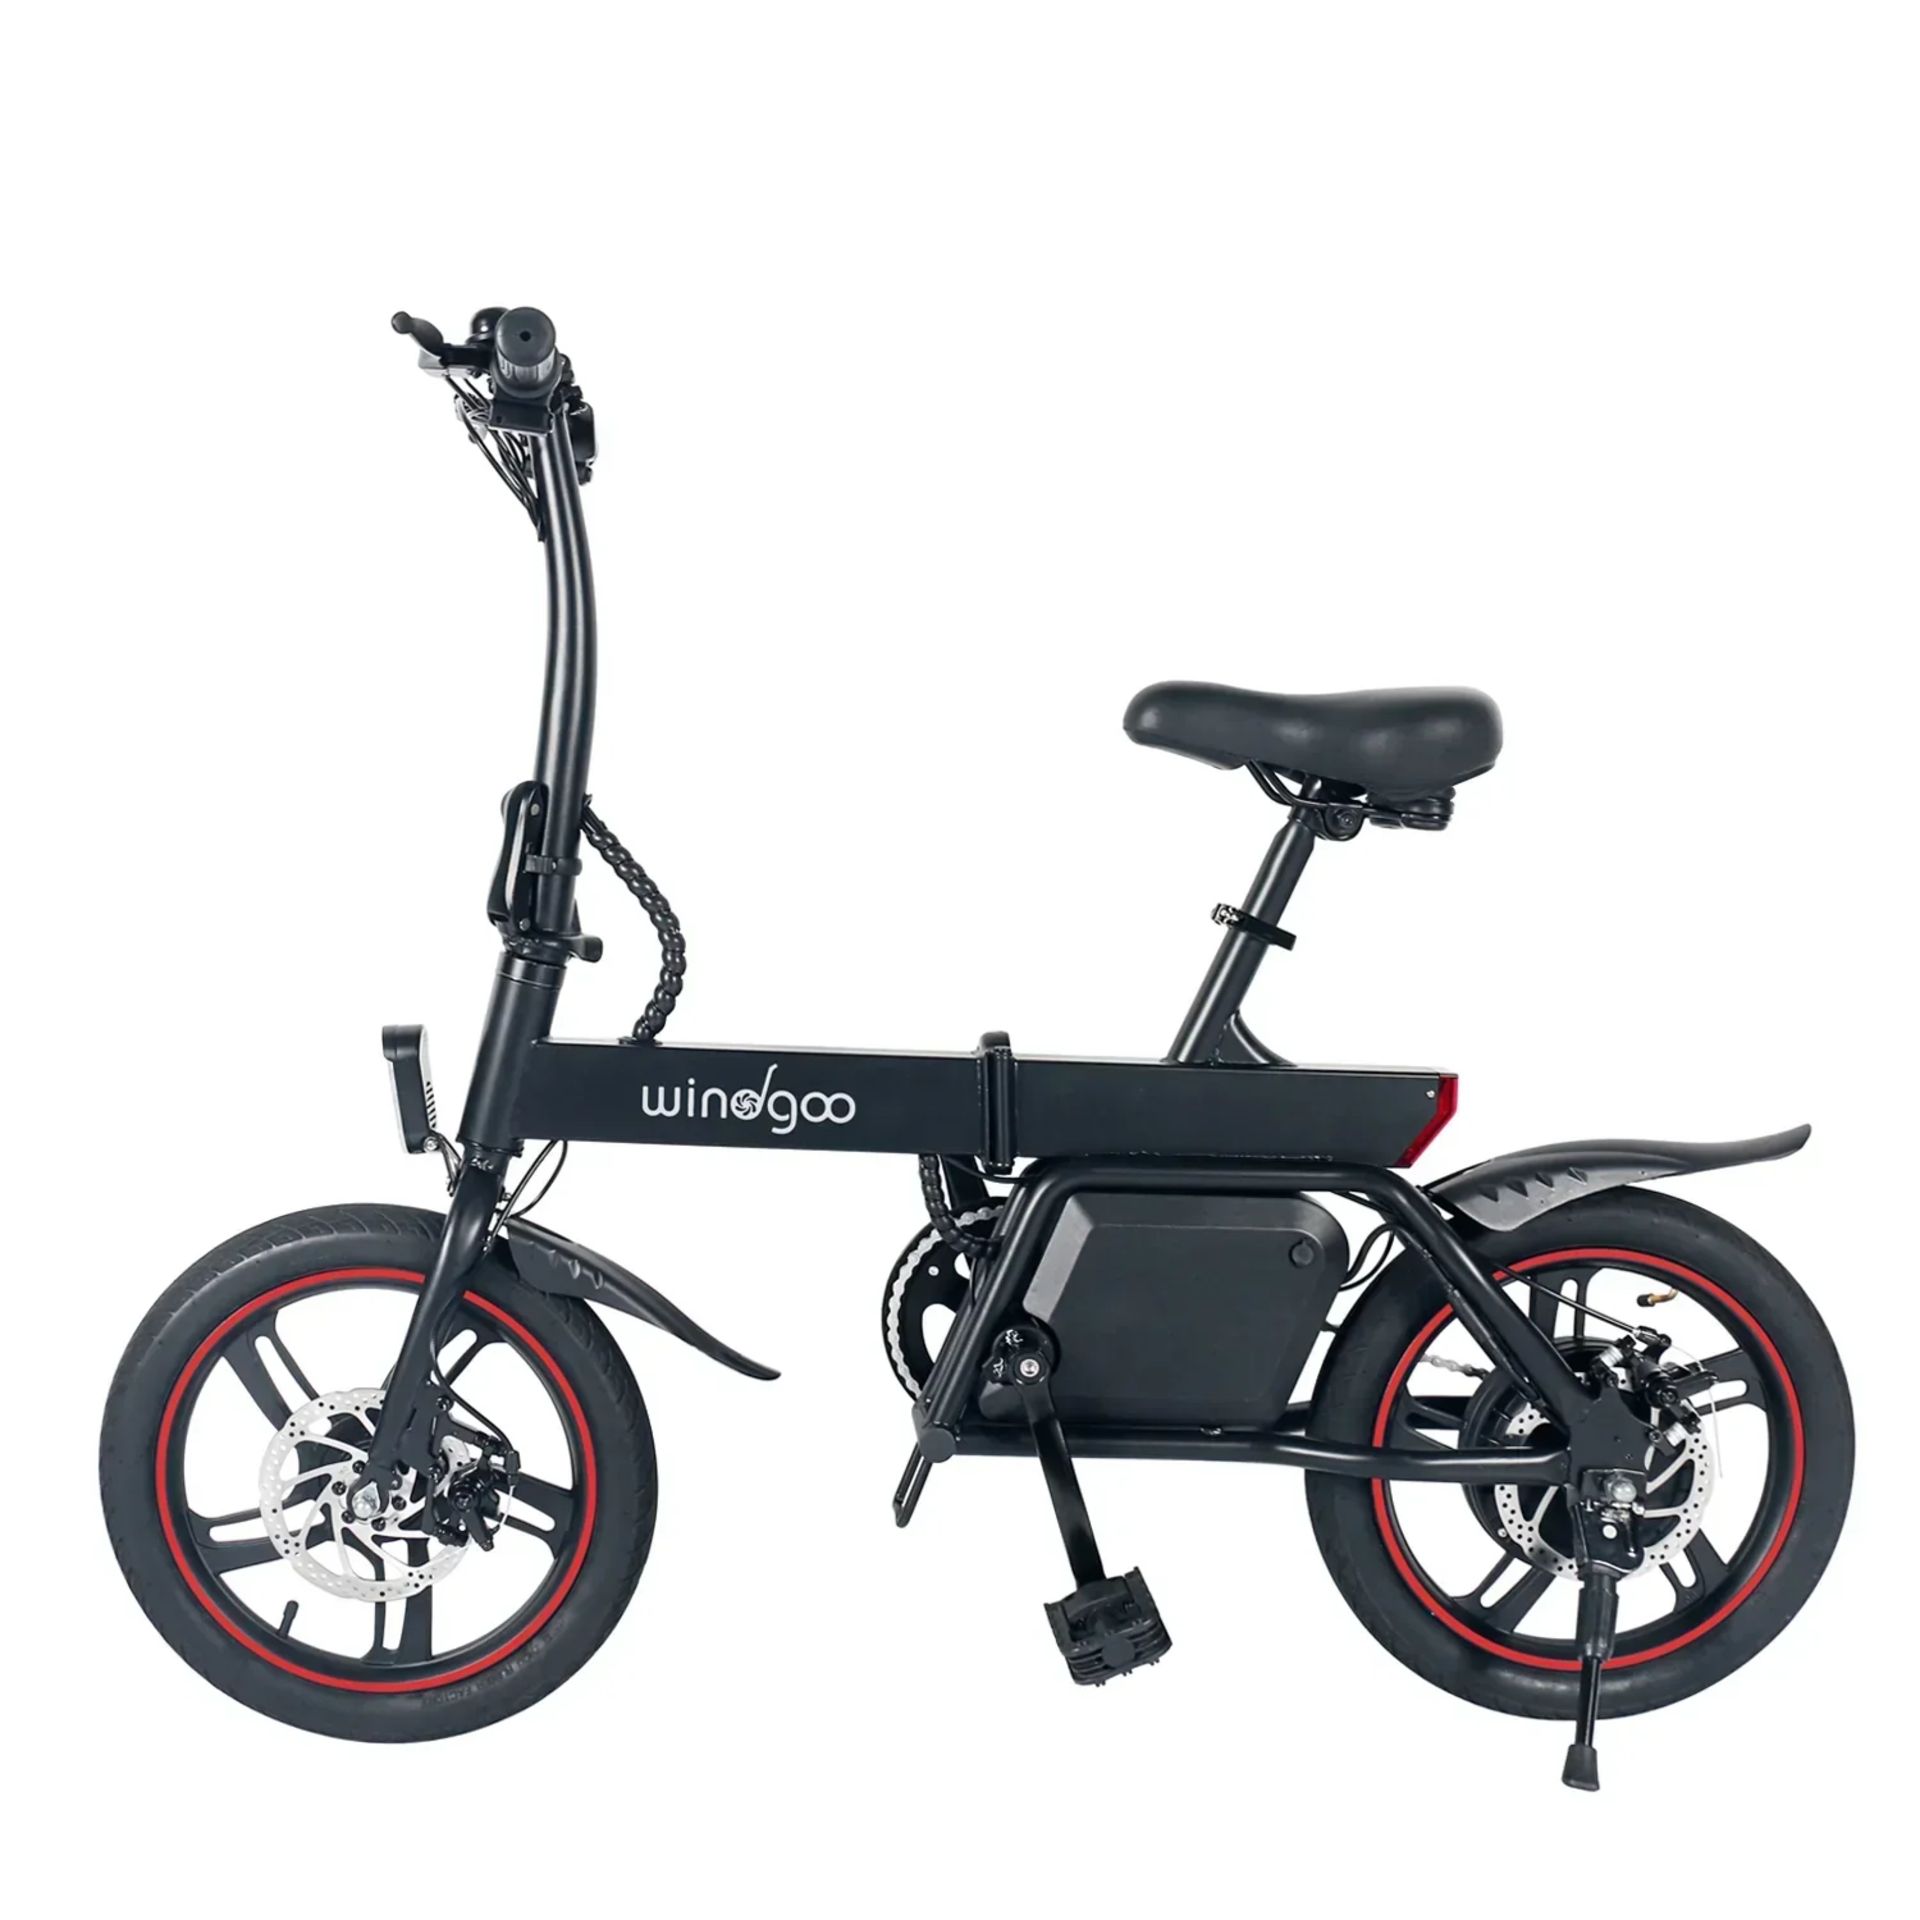 Windgoo B20 Pro Electric Bike. RRP £1,100.99. With 16-inch-wide tires and a frame of upgraded - Image 7 of 7